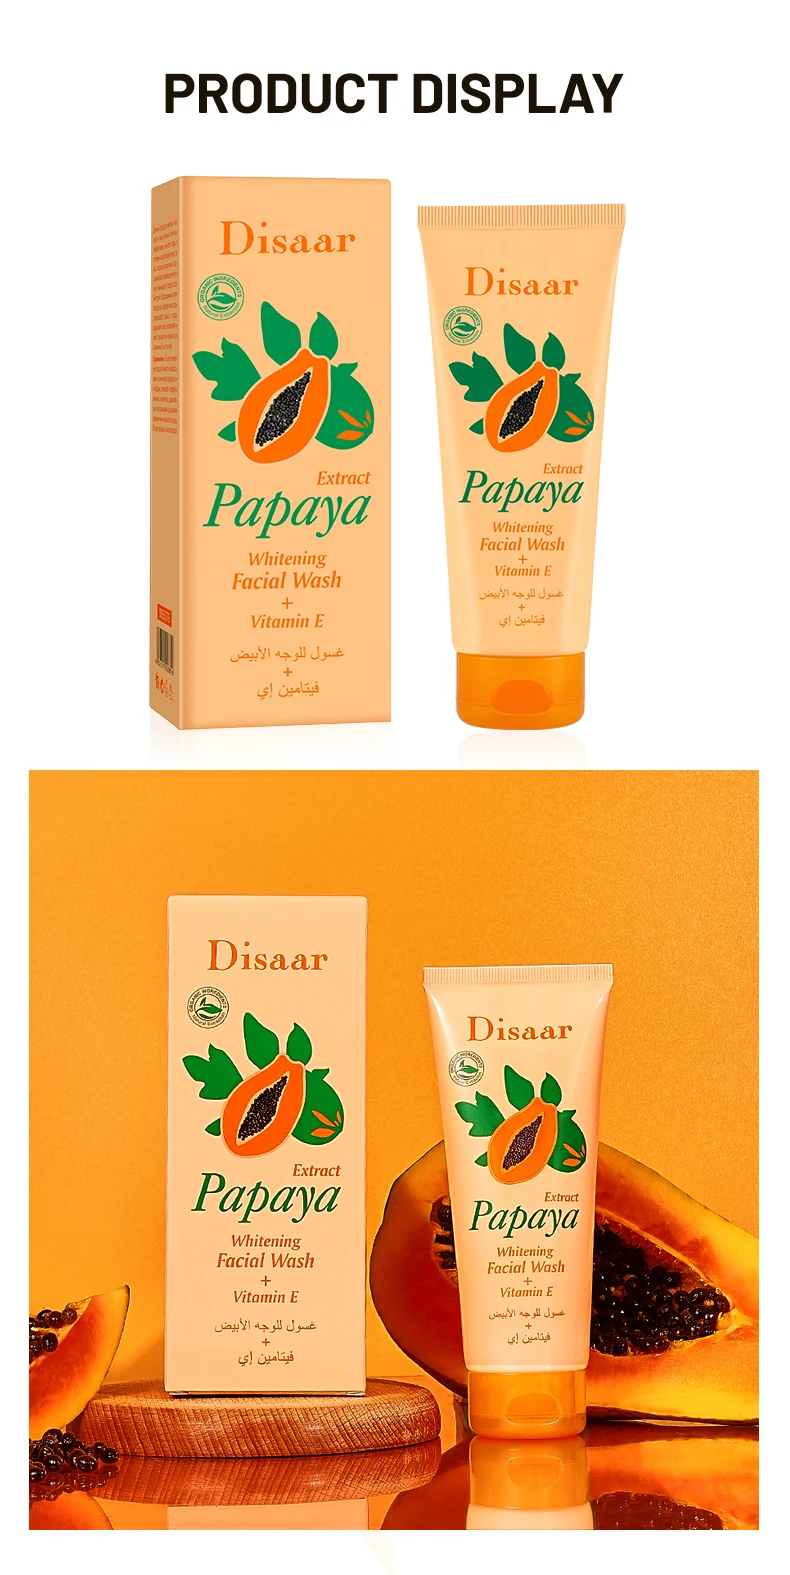 Disaar Papaya Facial Wash with Vitamin E Daily Skin Care Hand Cream for Adult Women Face Cream & Lotion Products